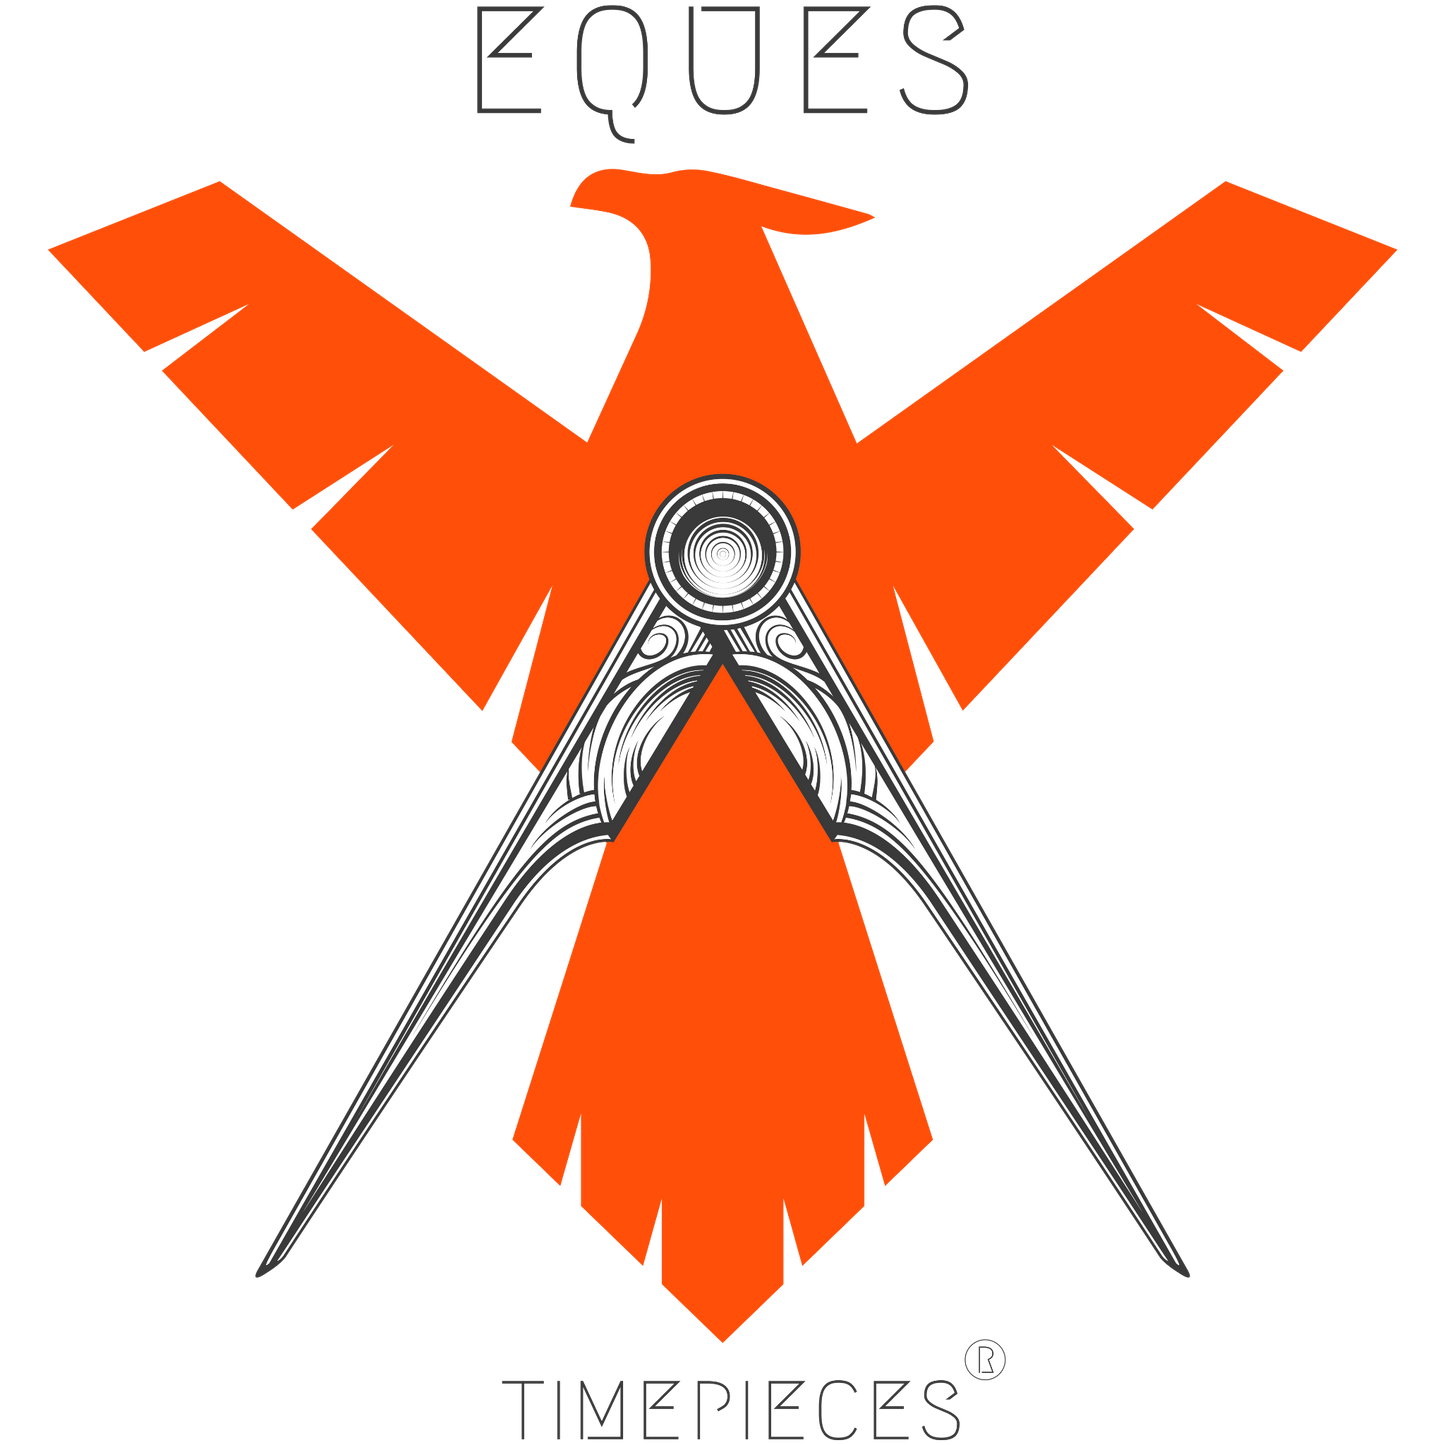 Eques Timepieces